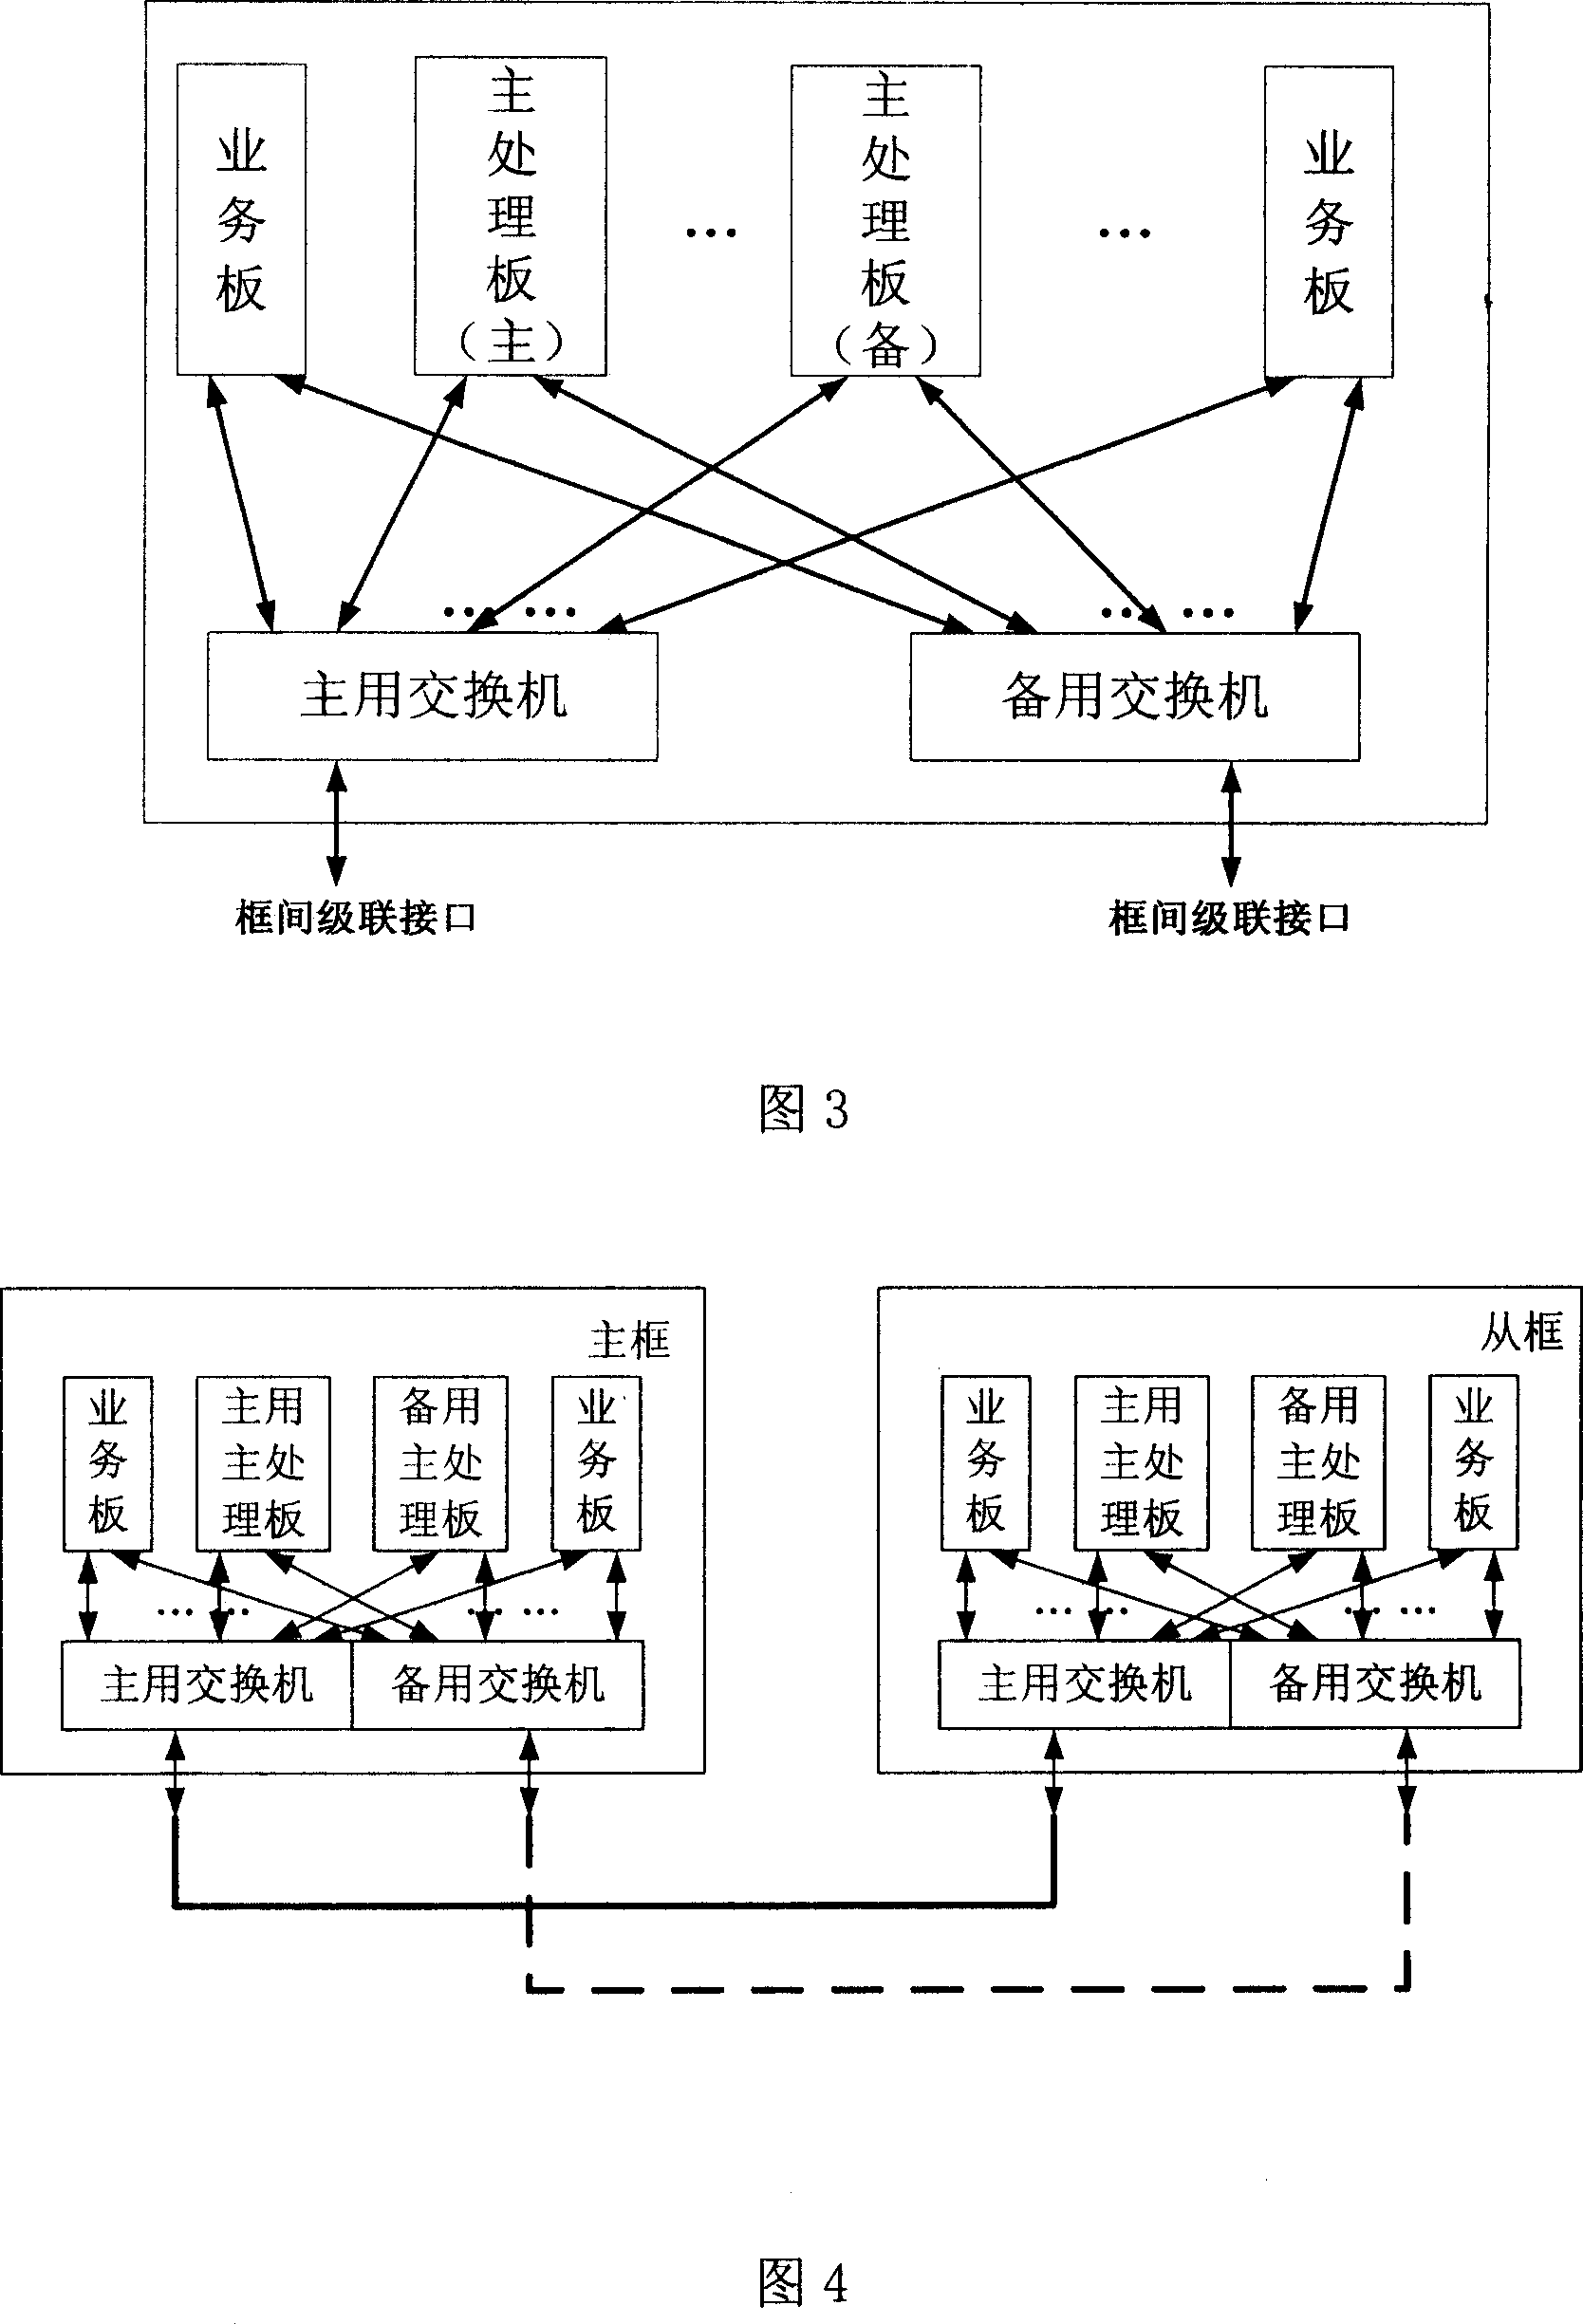 Frame device and its message transmitting method